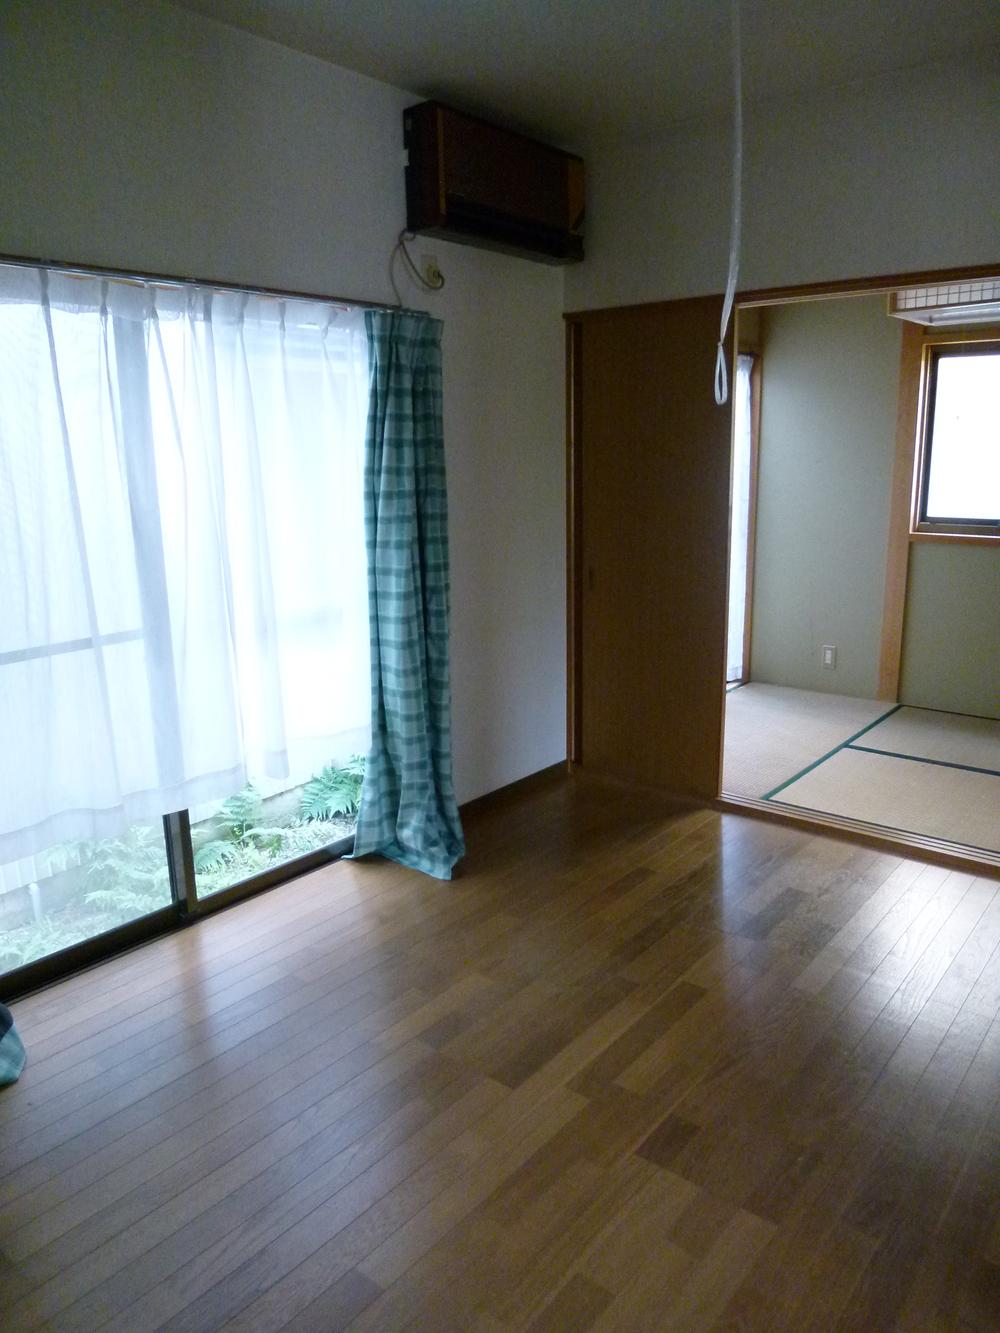 Living. It is living that can enter and leave even to Tsukaimichi various and convenient storage compartment.